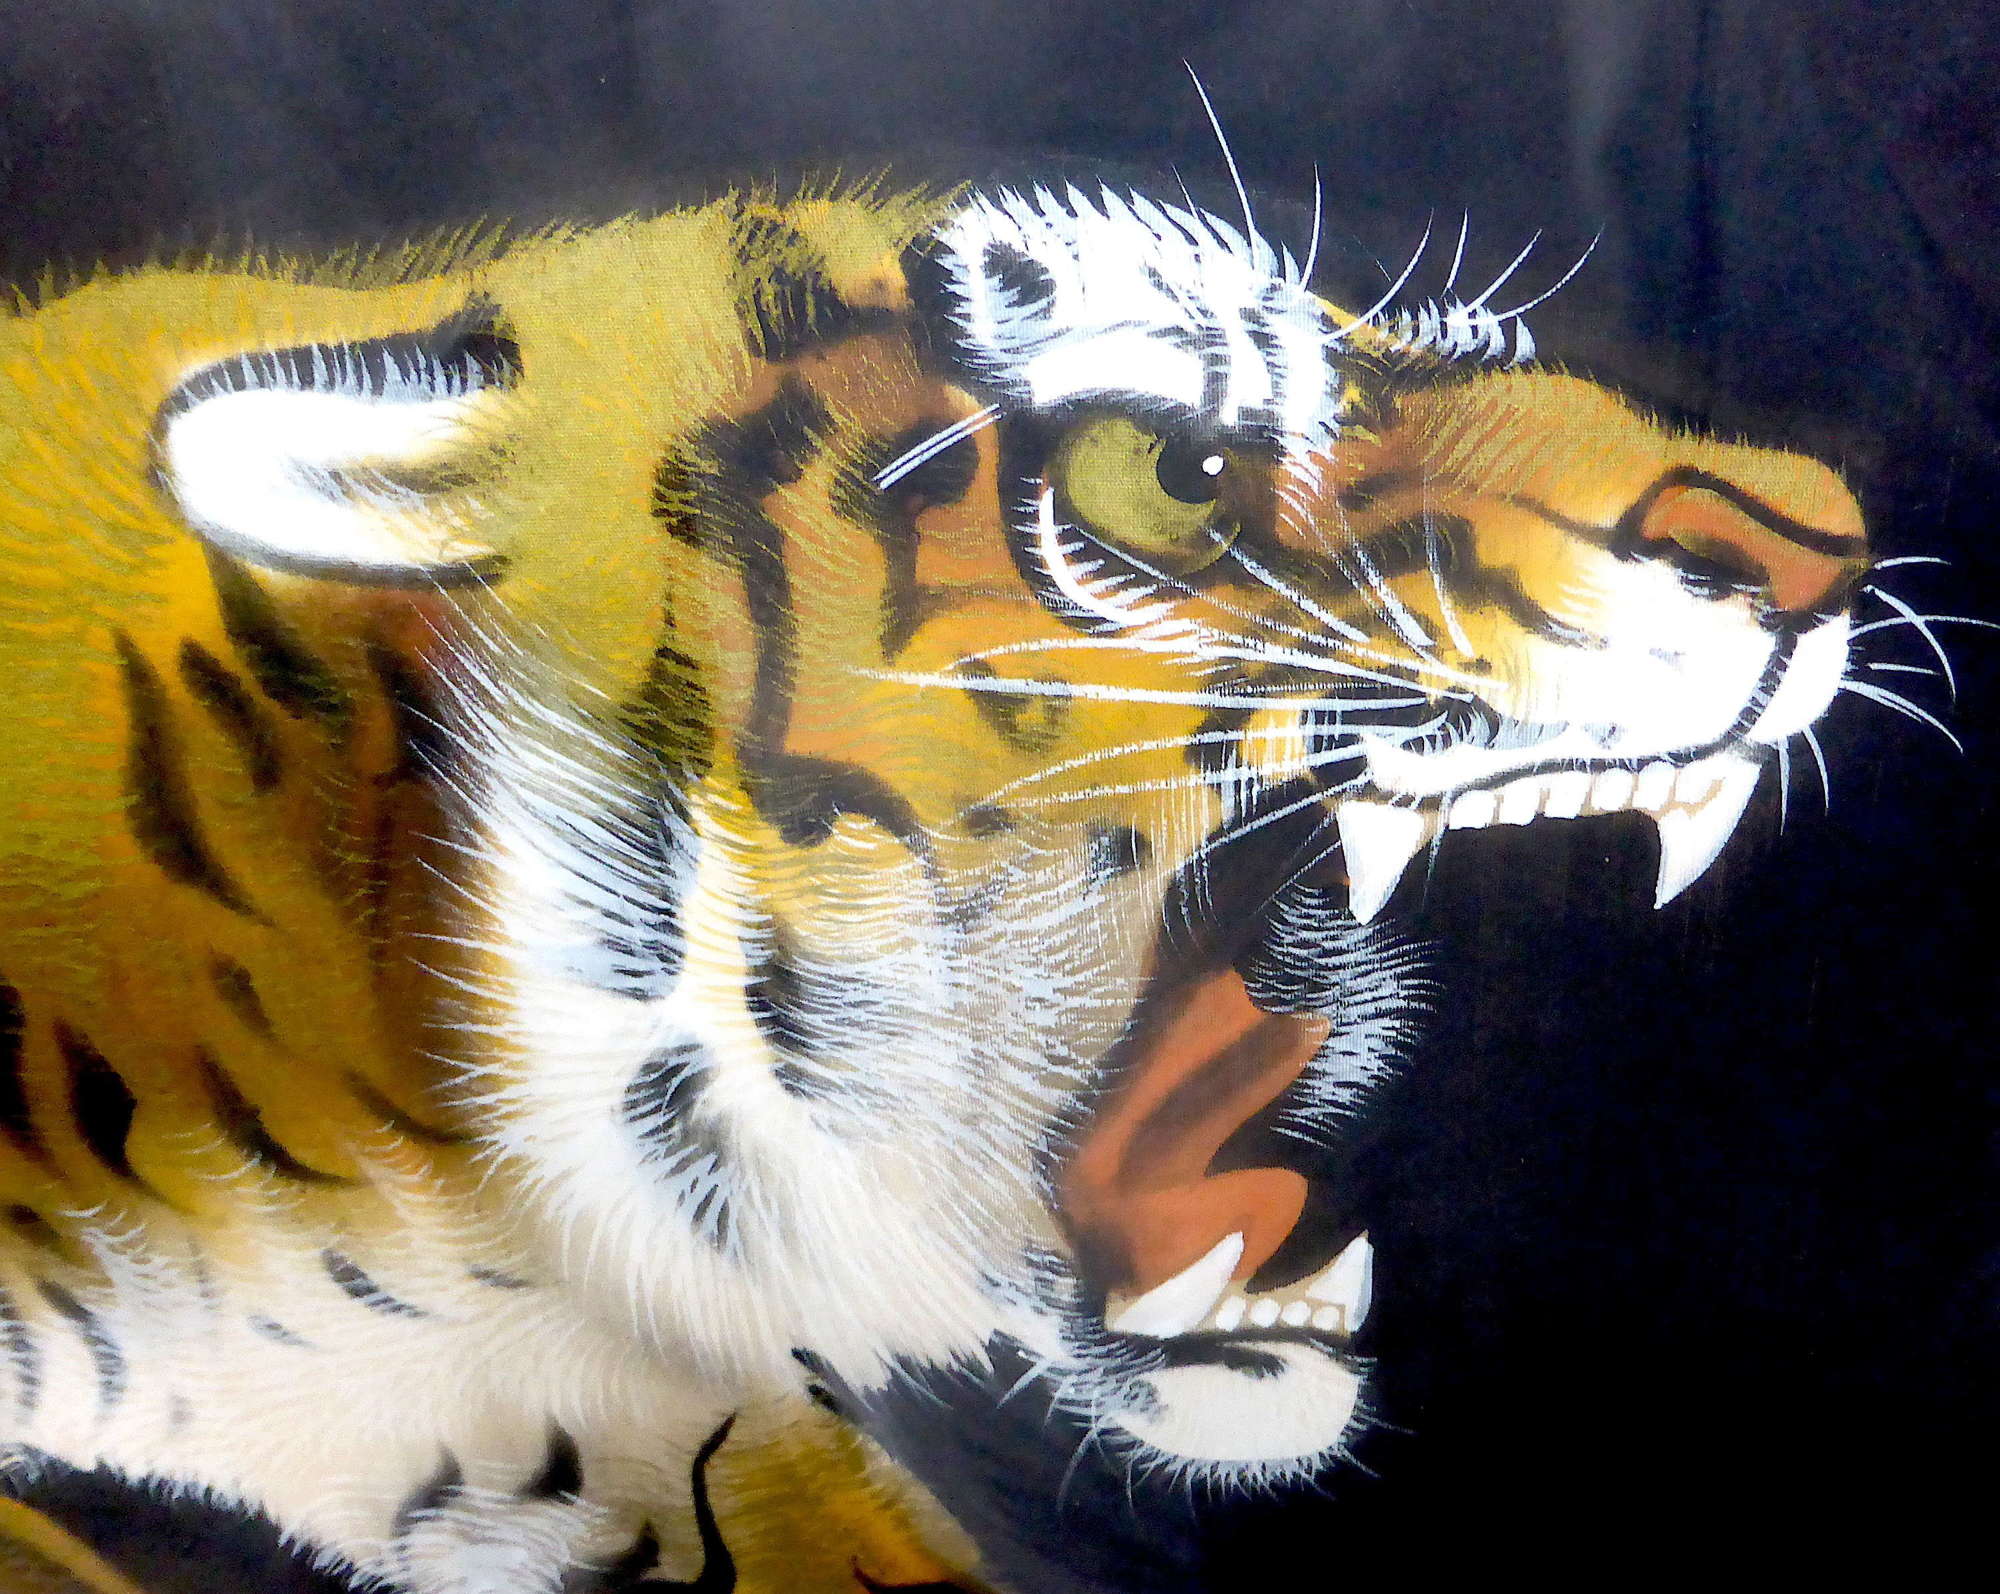 Japanese tiger painting